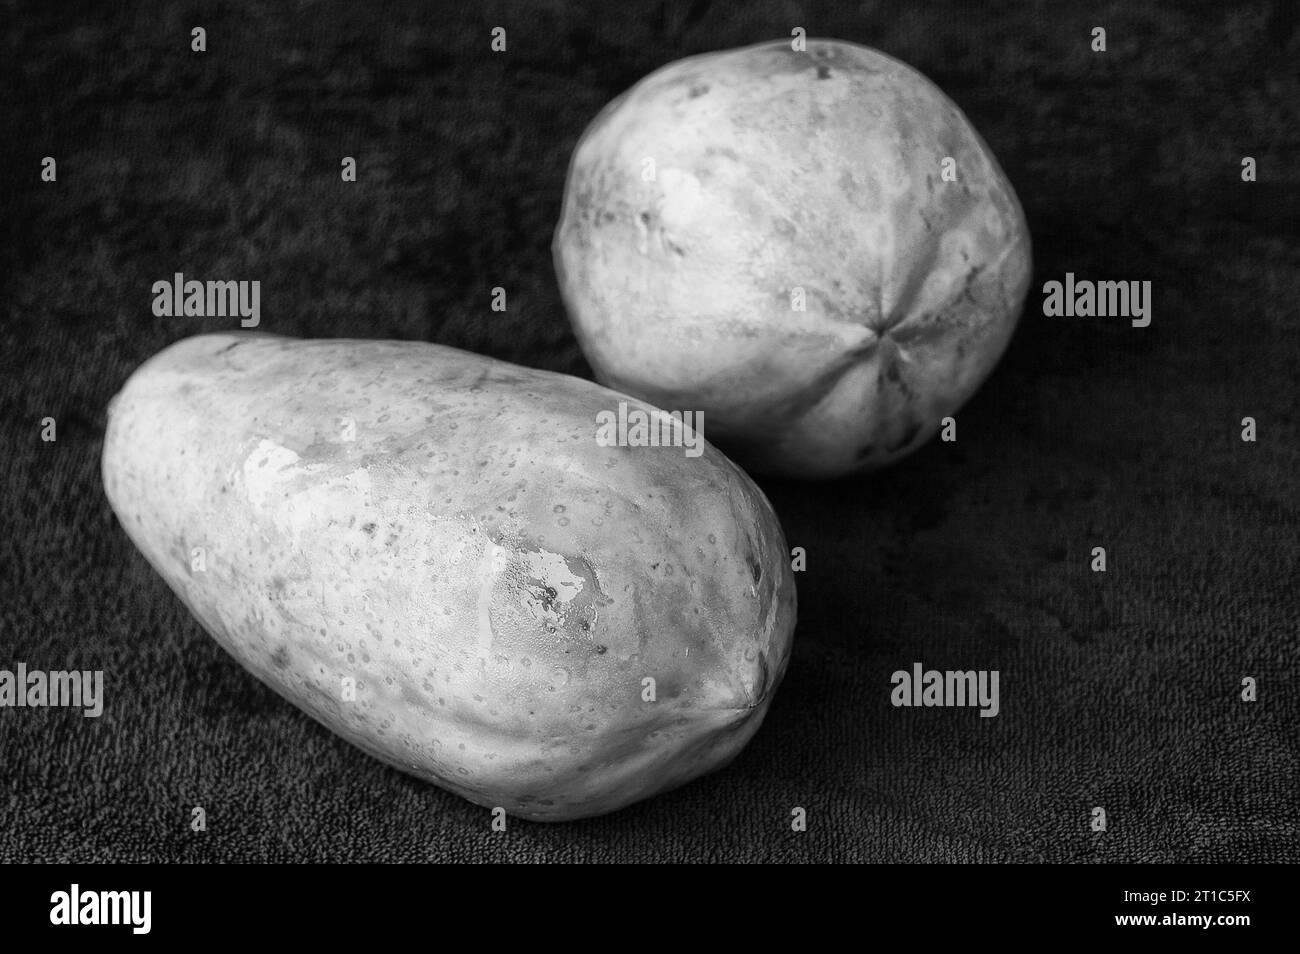 Black & white Stock Photos & Images from Alamy